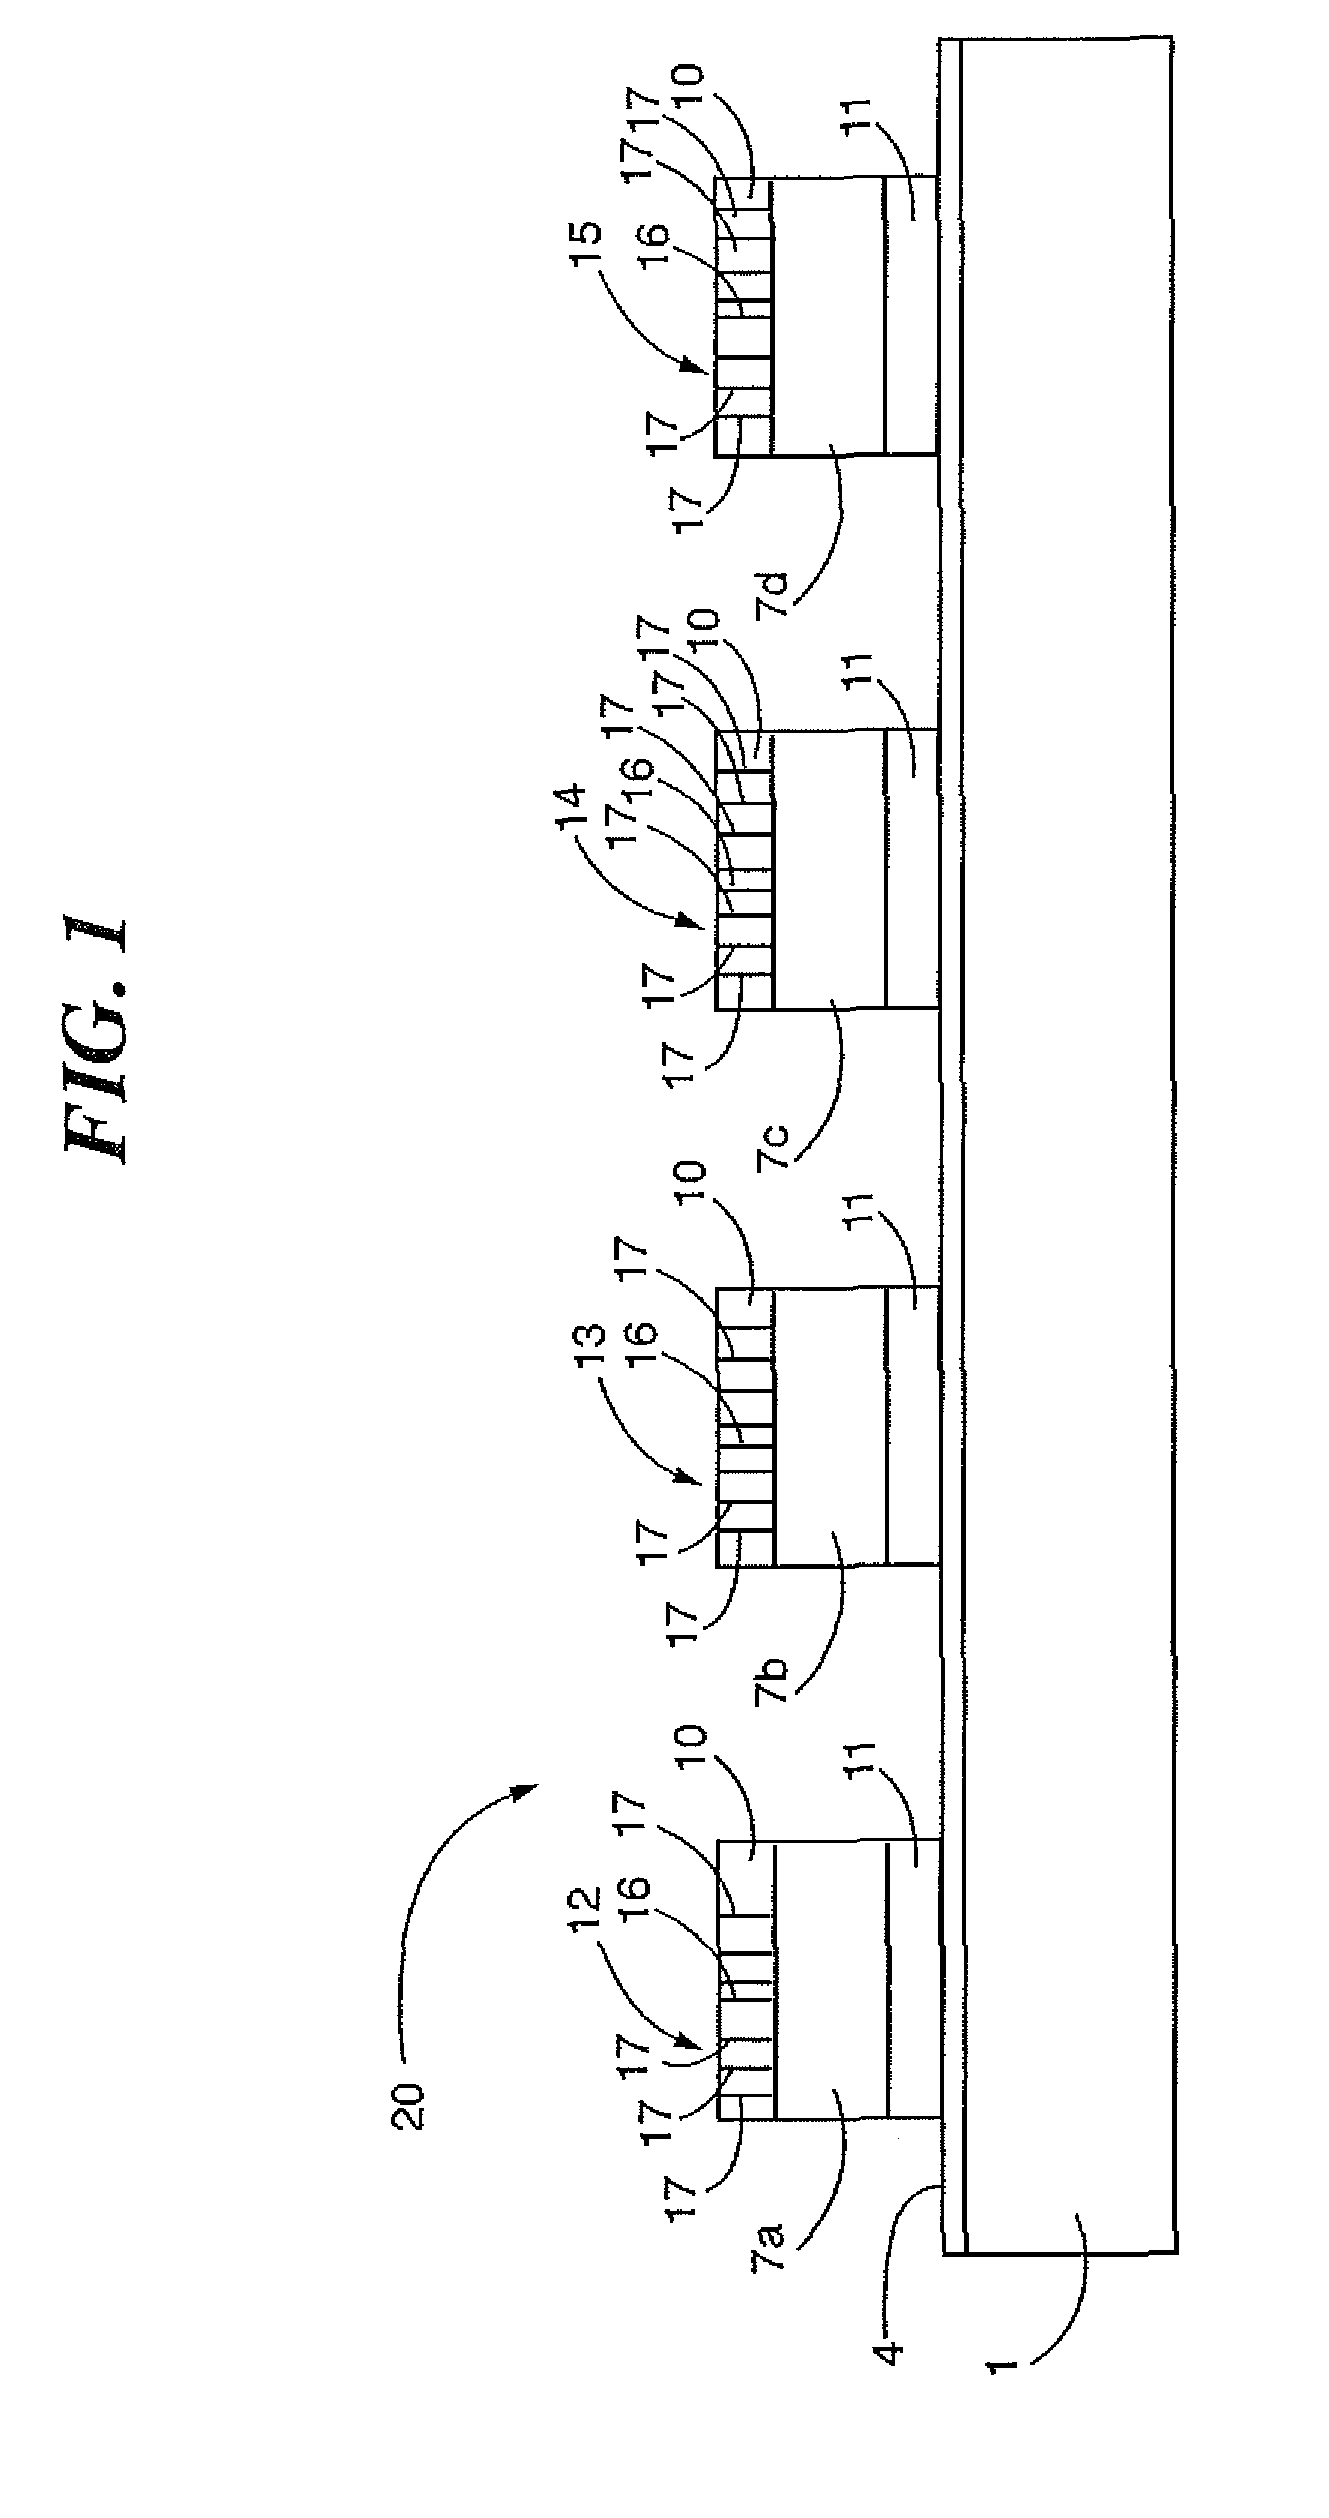 System and method for detecting and measuring ethyl alcohol in the blood of a motorized vehicle driver transdermally and non-invasively in the presence of interferents